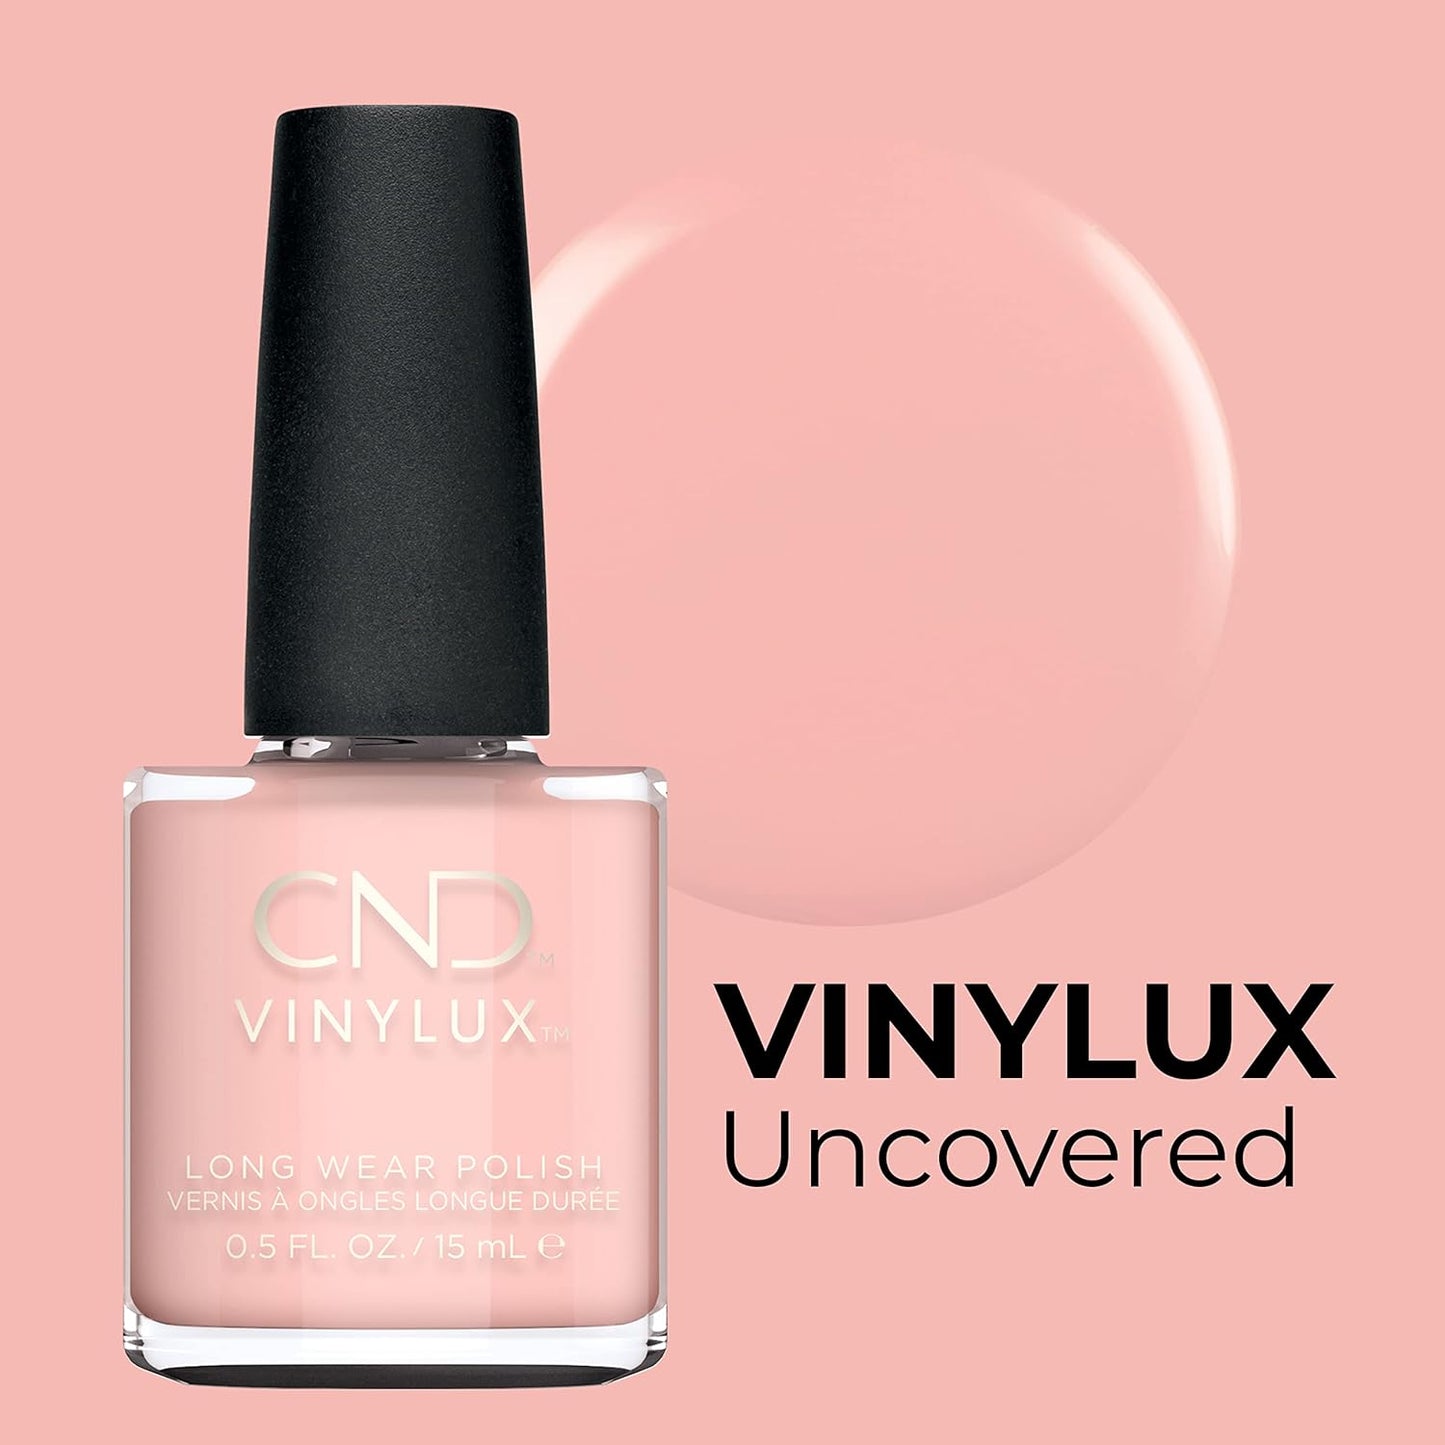 CND Vinylux - Uncovered #267 - Universal Nail Supplies